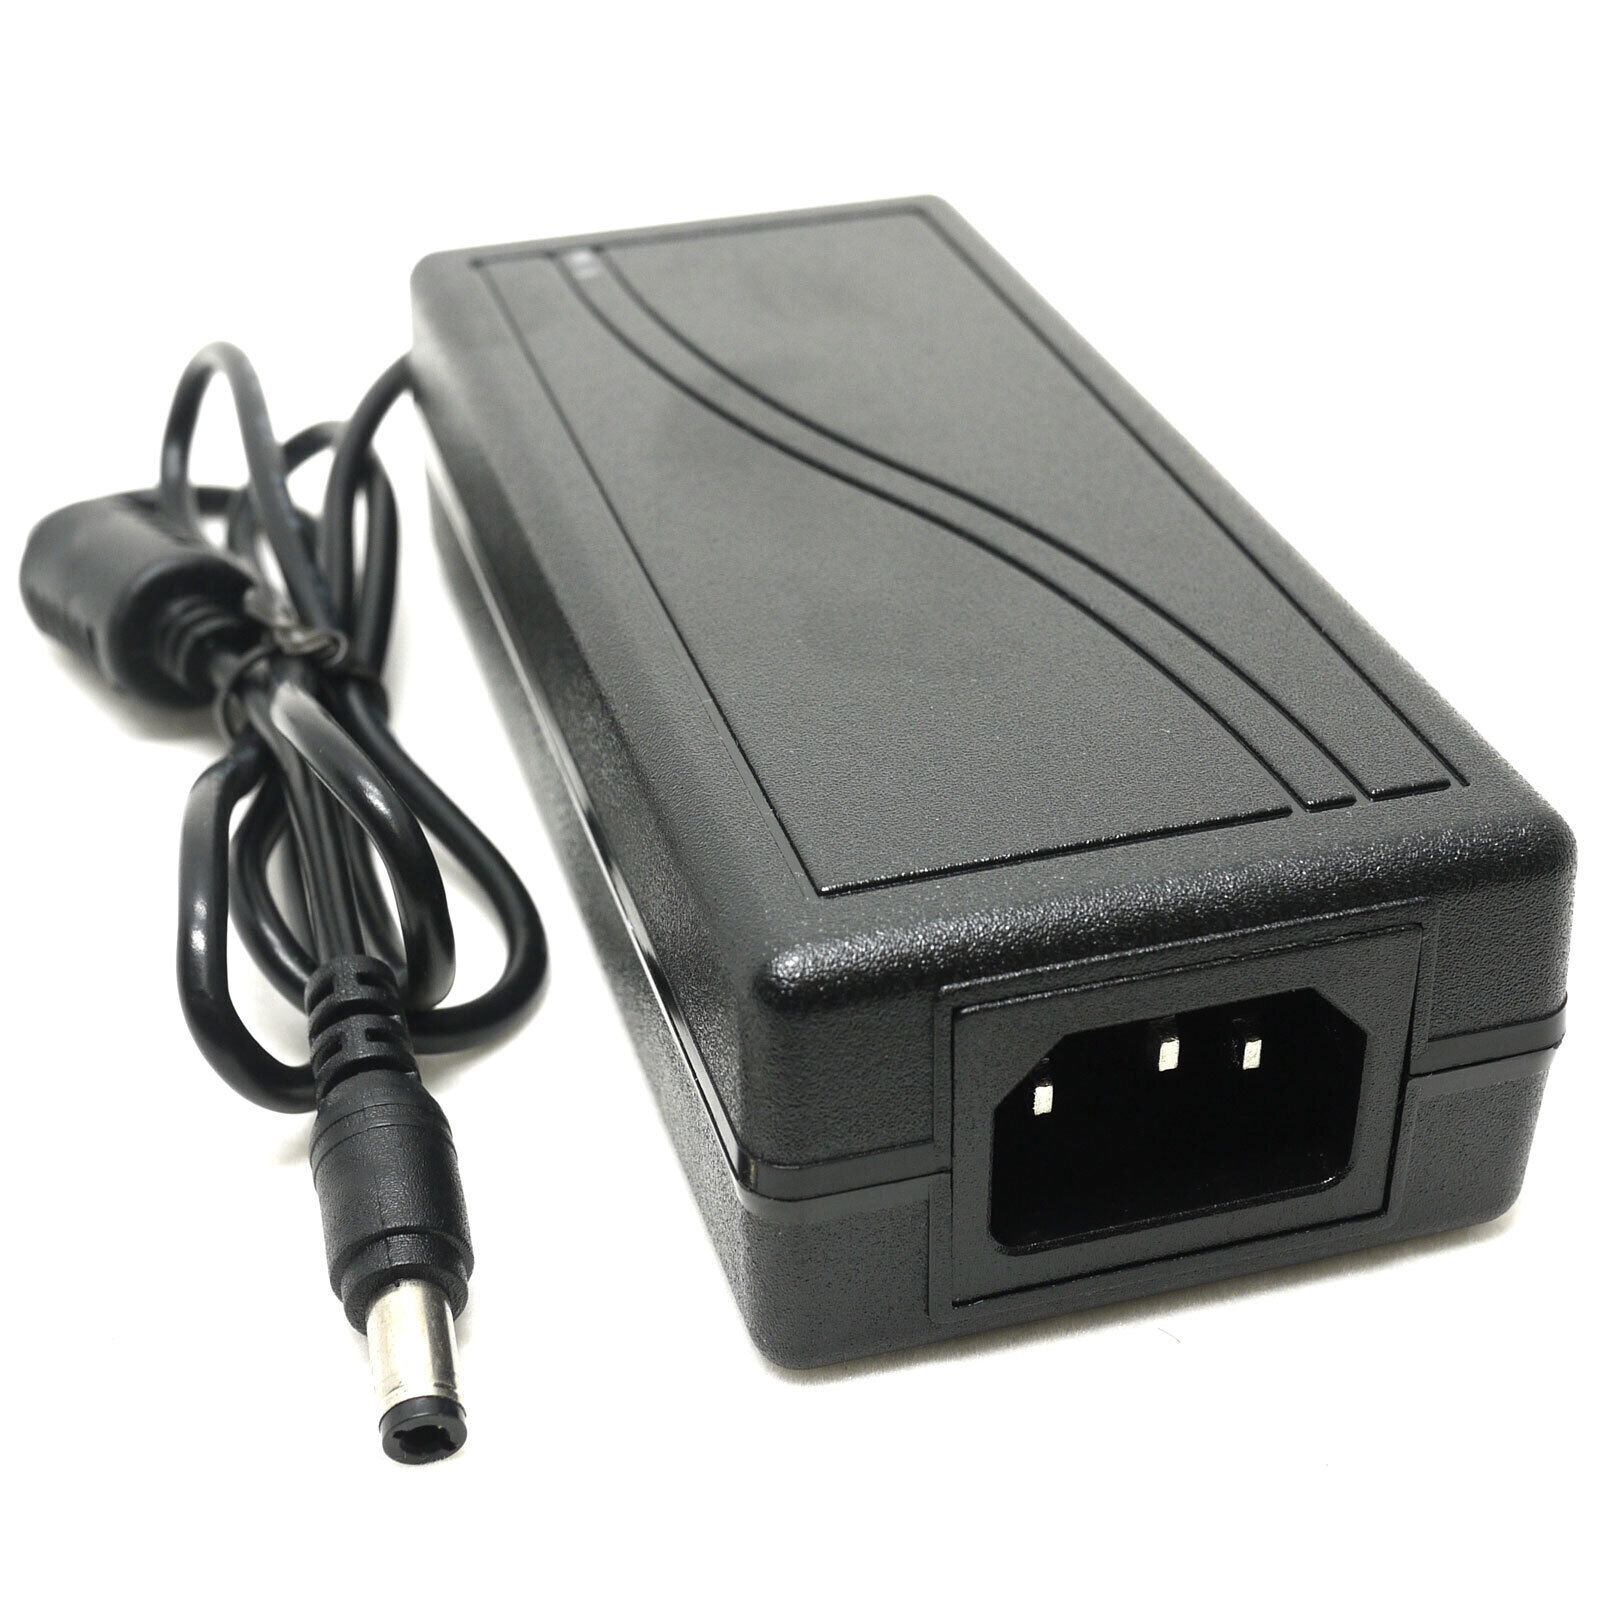 48V 2A 96Watt AC to DC Power Supply Adapter 100-240V for PoE Switch Injector